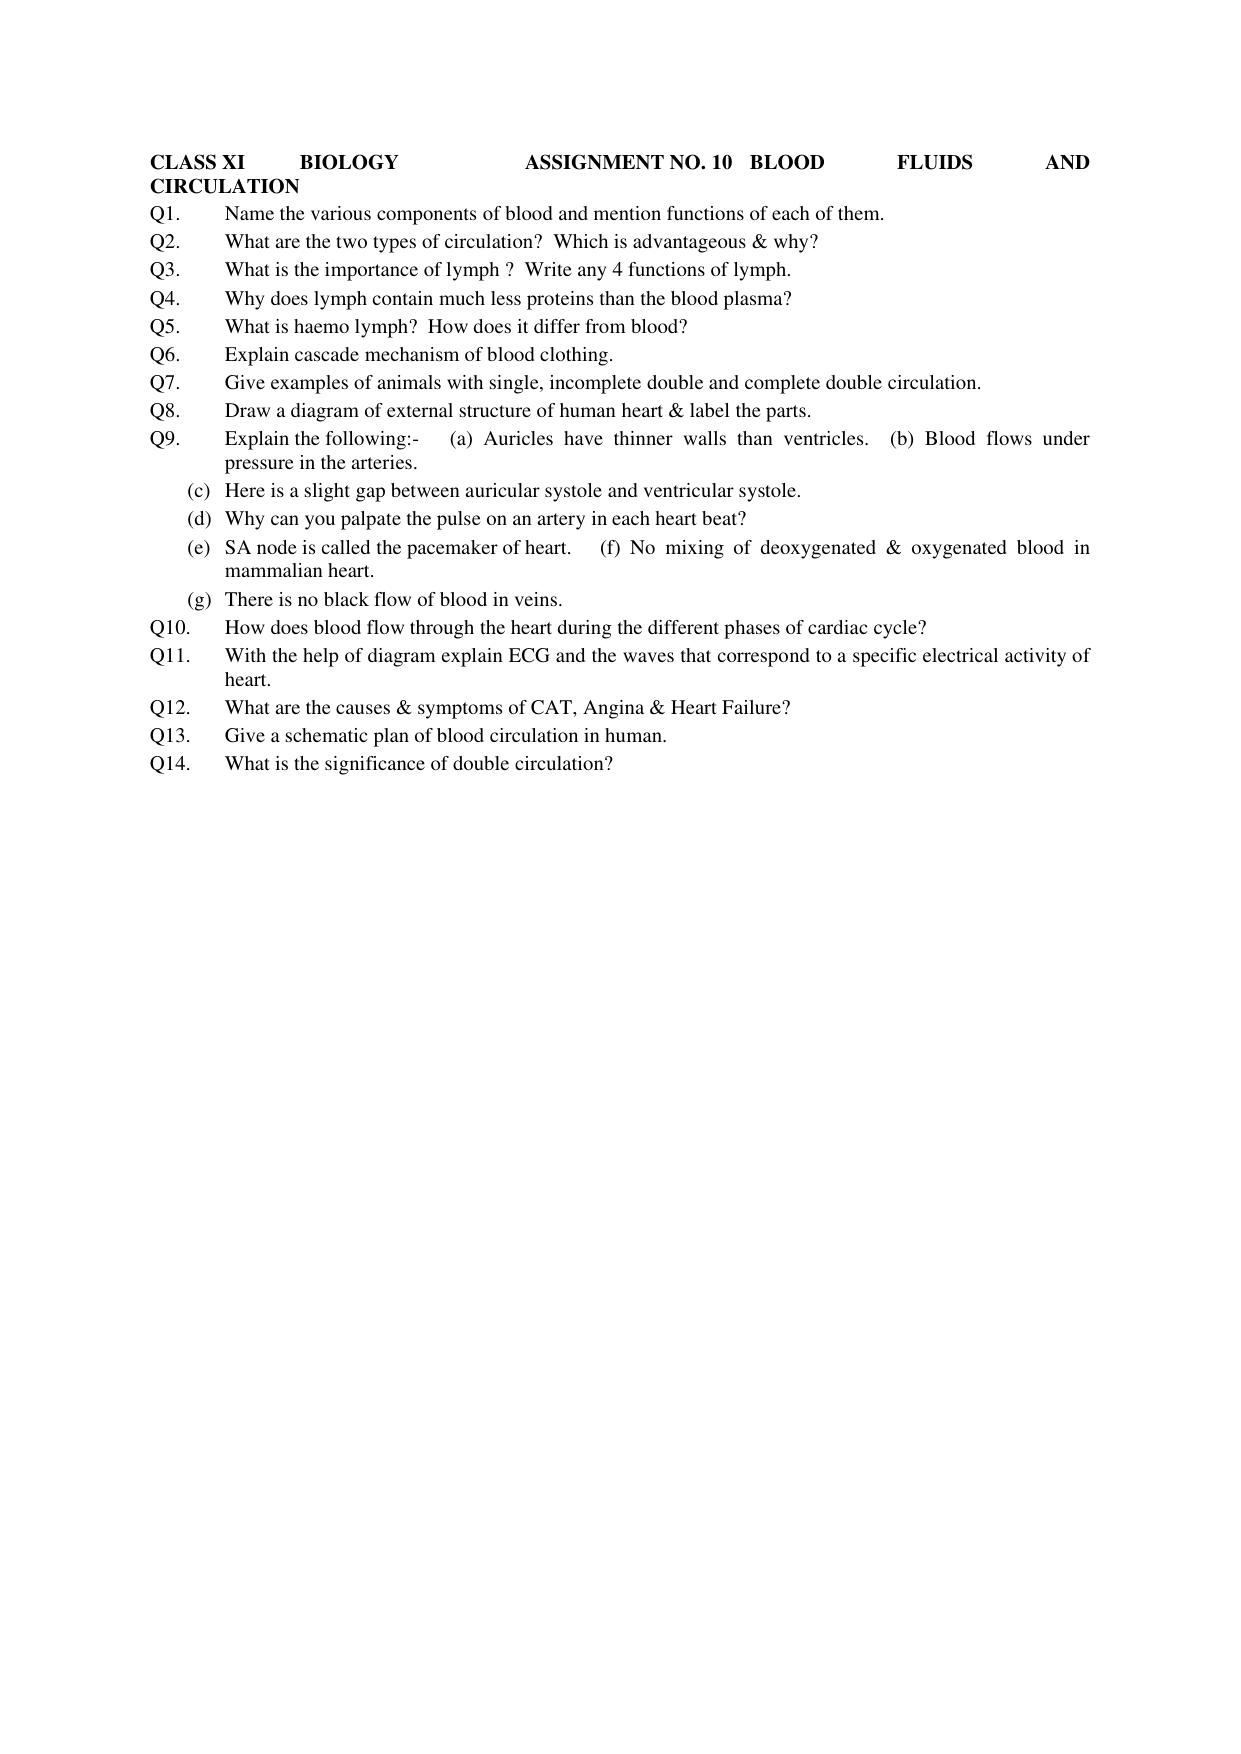 CBSE Worksheets for Class 11 Biology Assignment 10 - Page 1